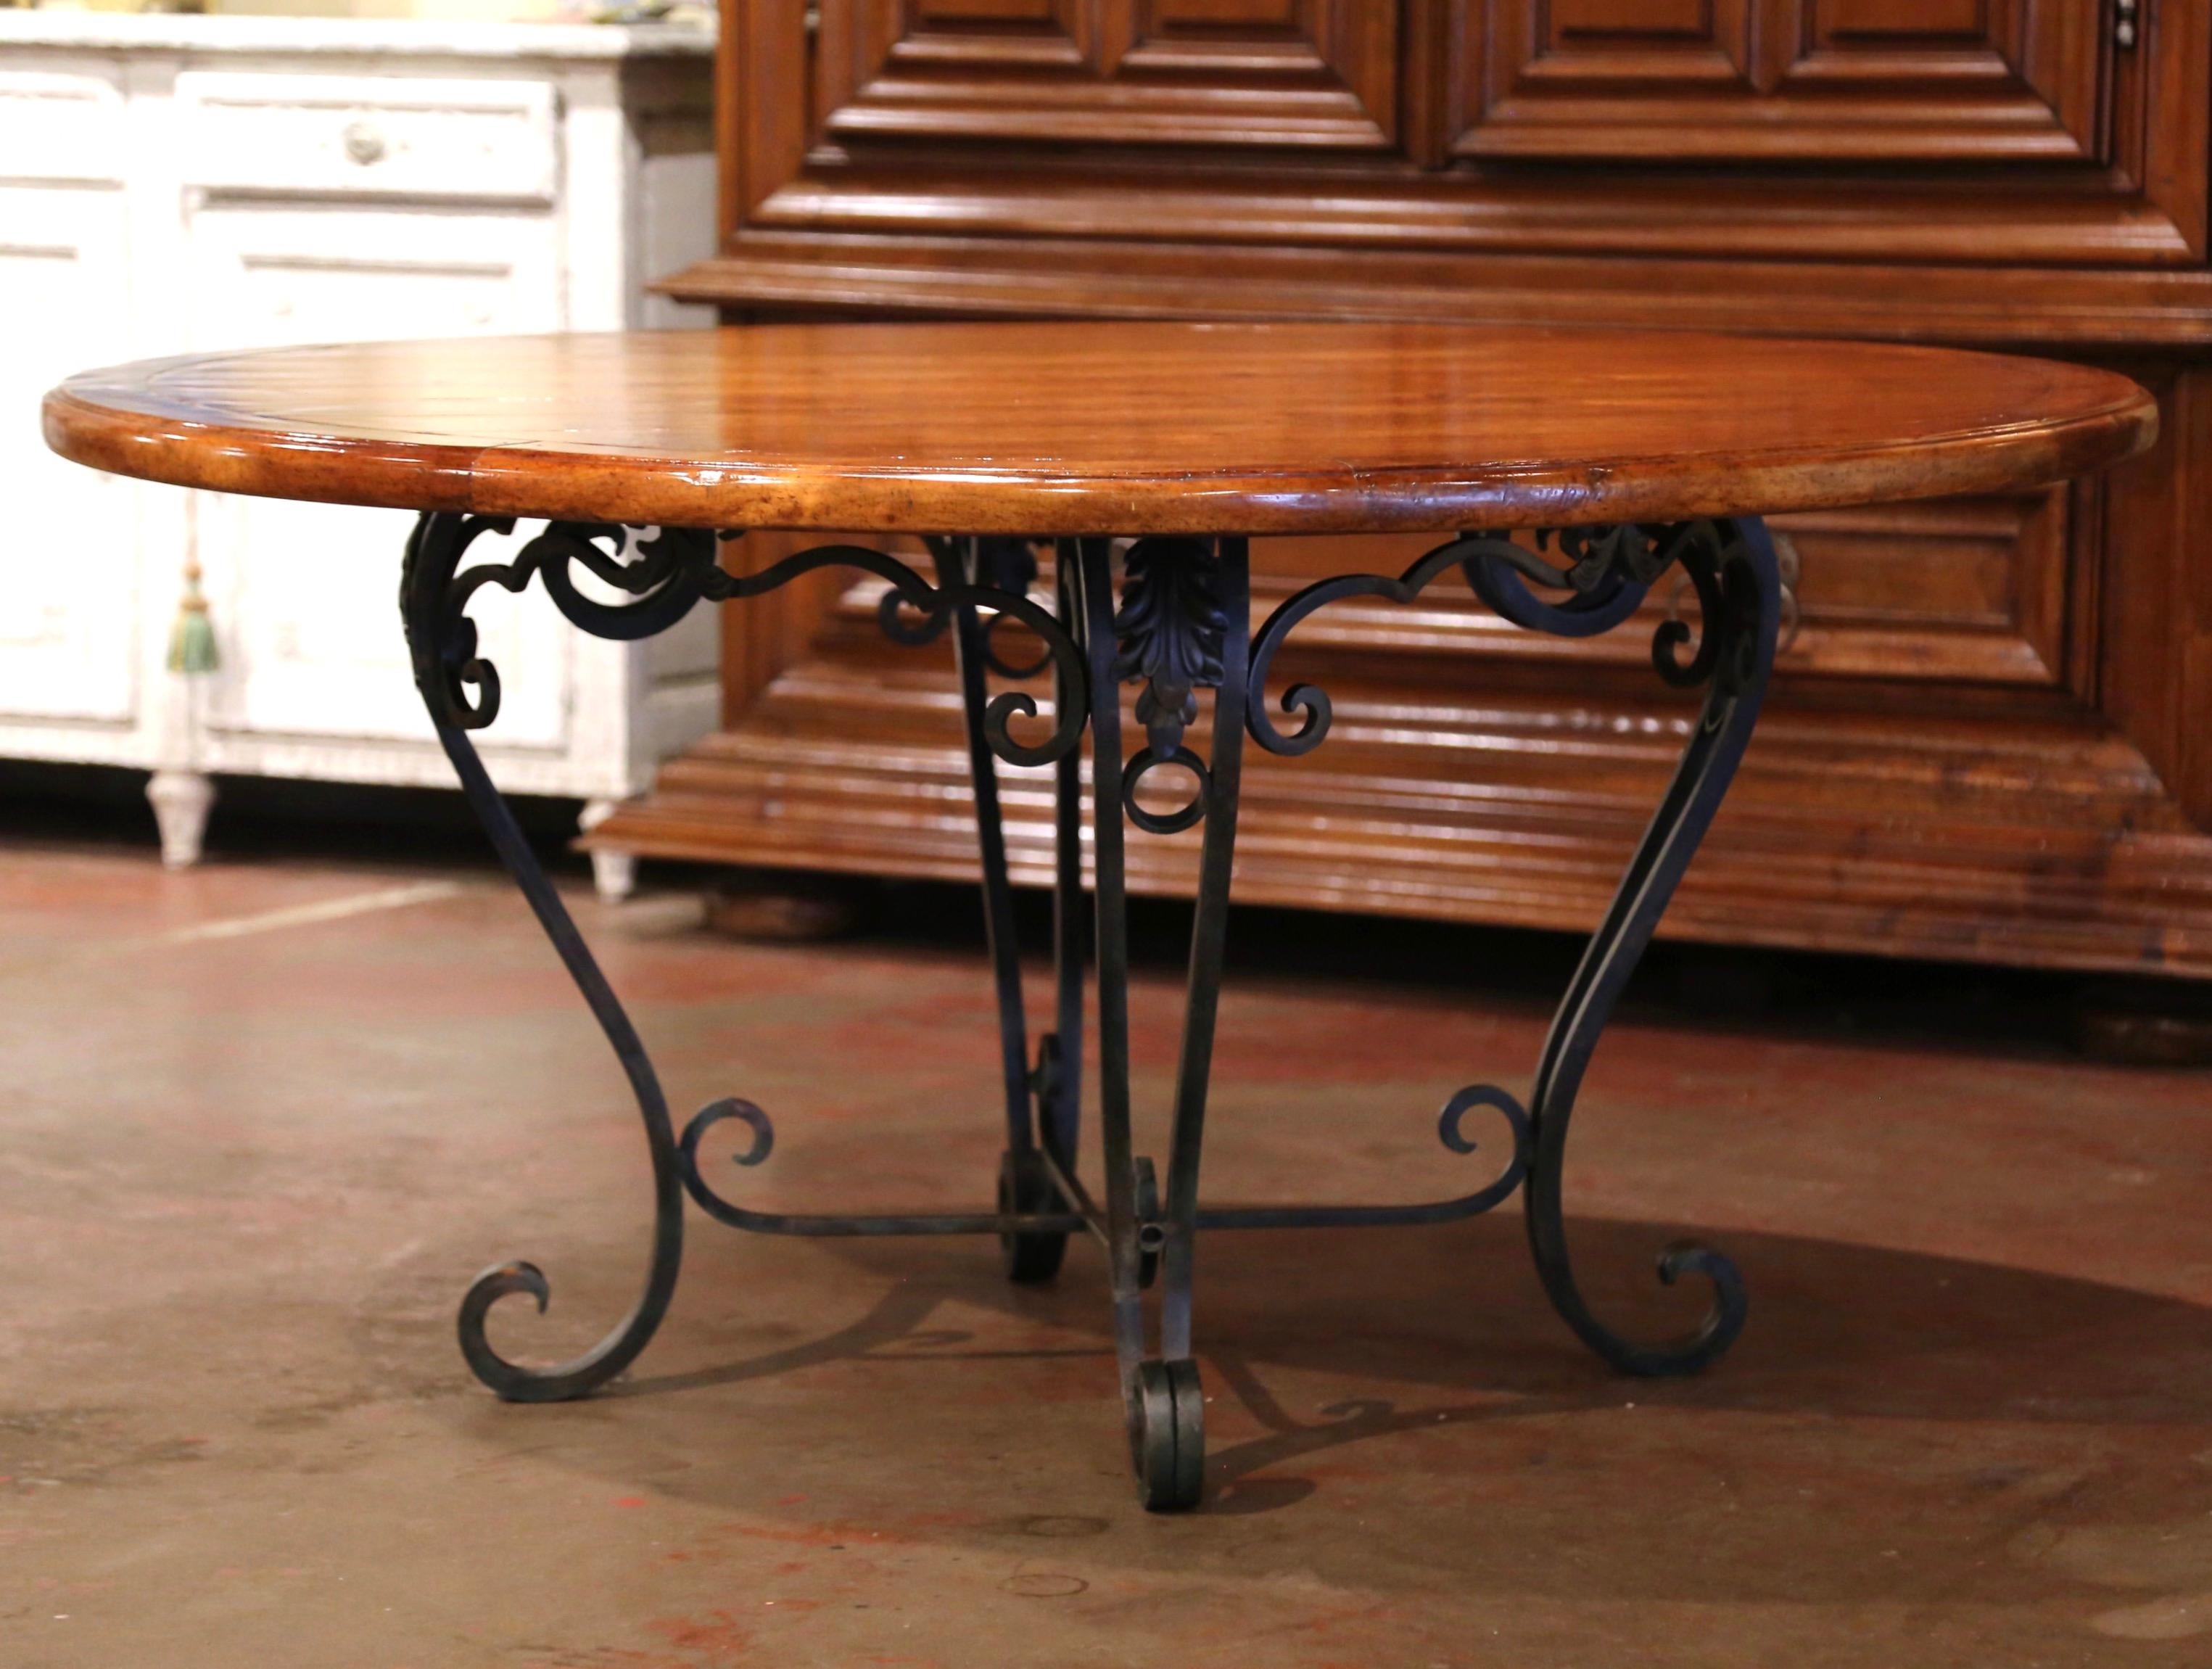 Crafted in the USA circa 1990, the elegant table stands on forged cabriole legs ending with scrolled feet over a curved bottom stretcher. The circular wooden top features old timber planks set inside a round frame over an intricate scalloped apron